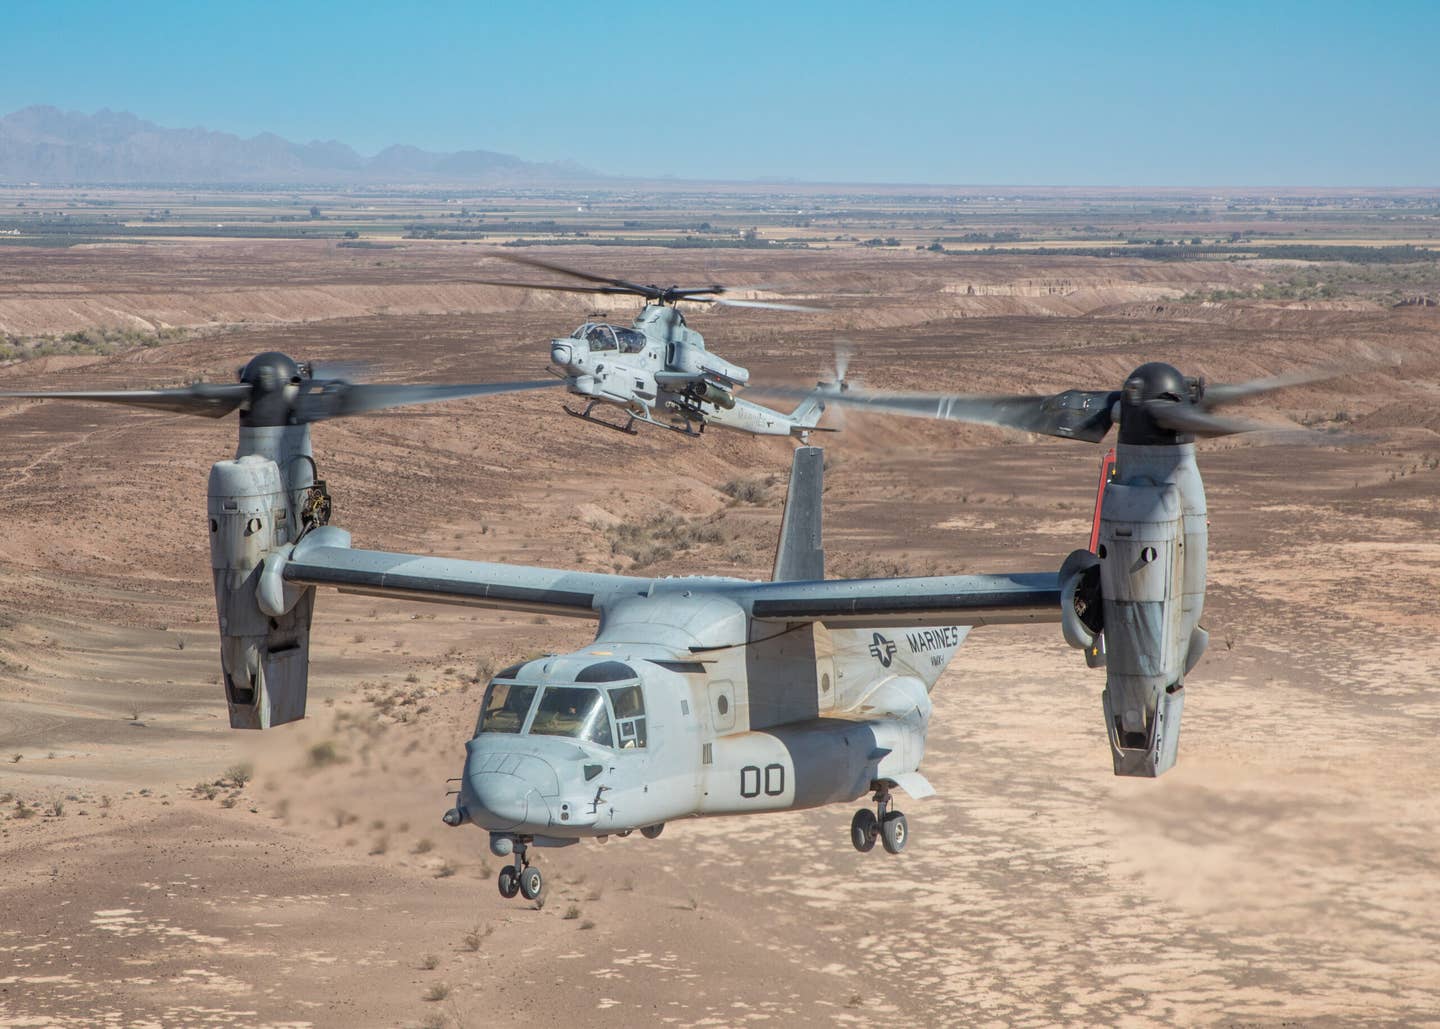 VMX-1 Osprey and Cobra fly alongside each other at slow speed. (Author's photo)